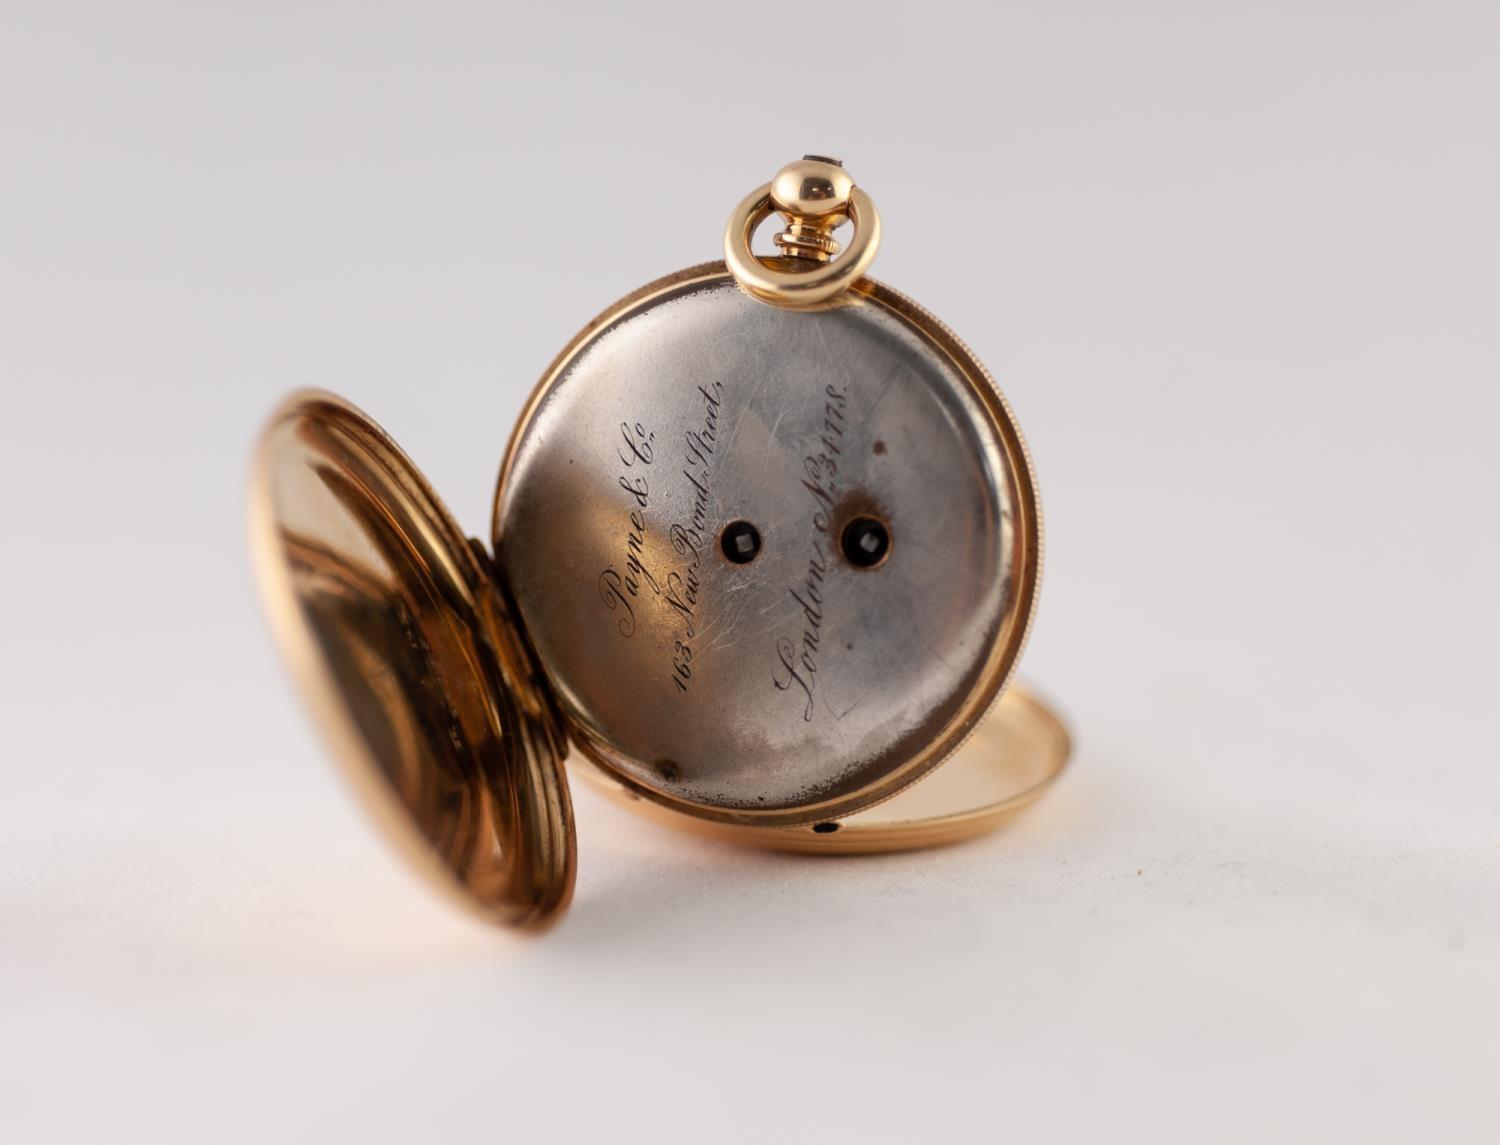 18k GOLD LADY'S DEMI HUNTER POCKET WATCH with keywind movement, white roman dial with subsidiary - Image 3 of 4